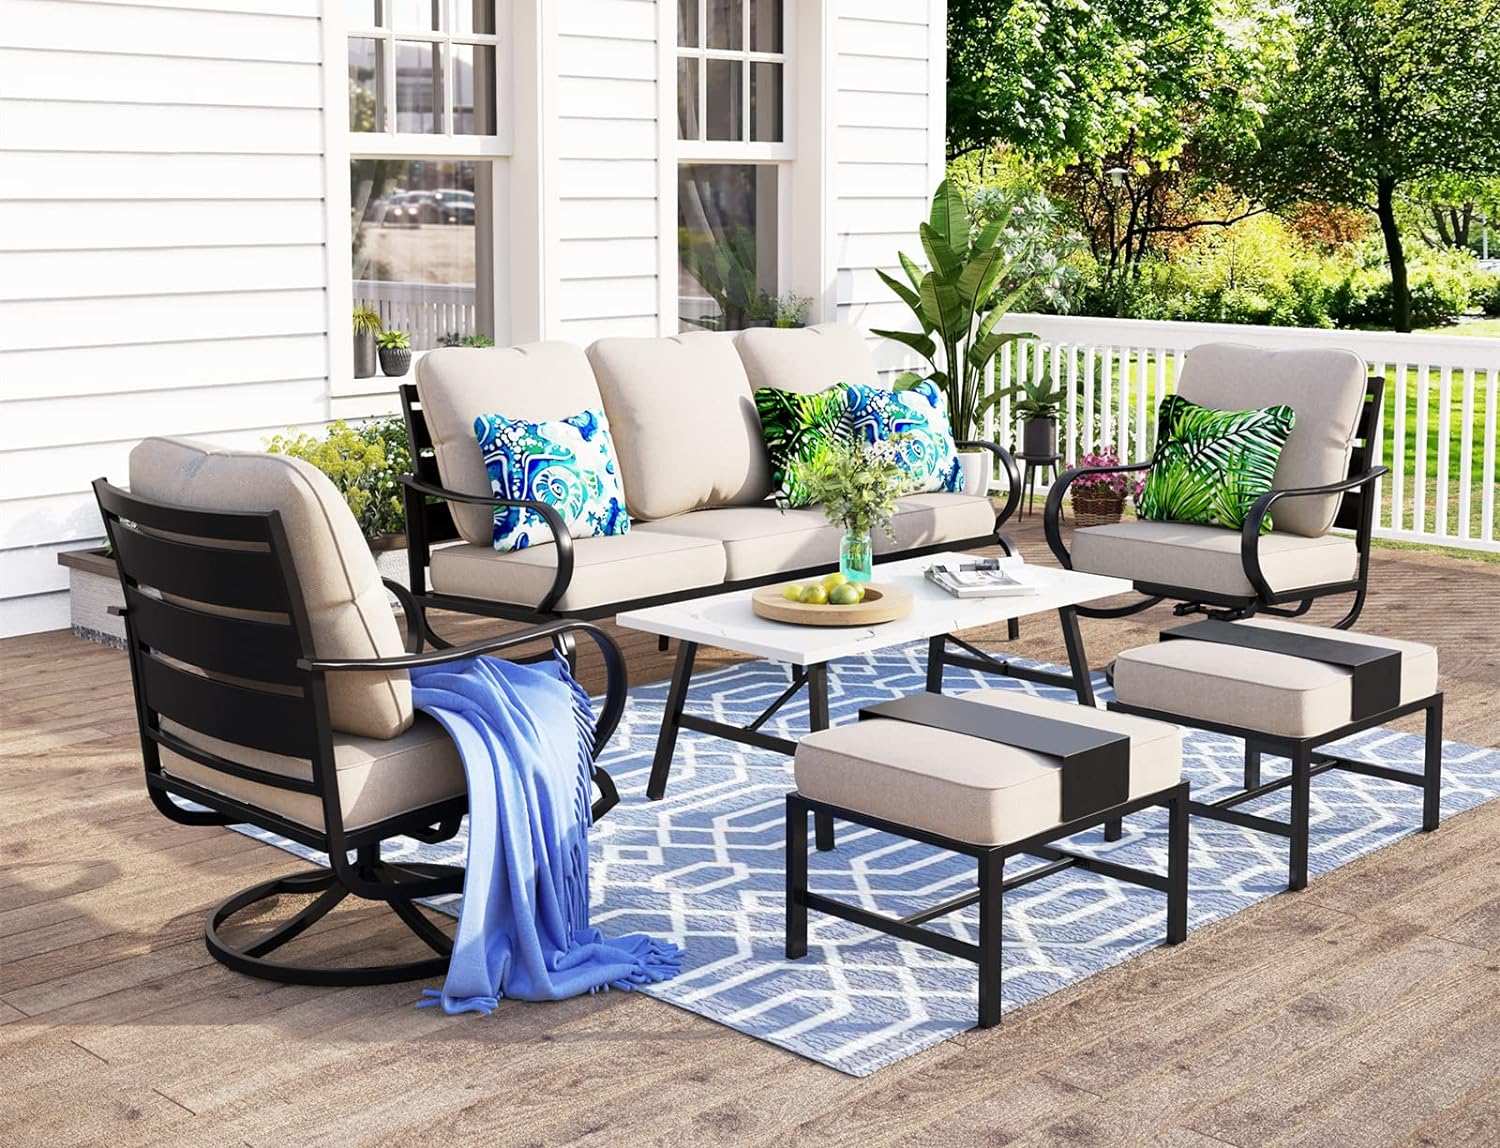 MFSTUDIO 6 Pieces Patio Conversation Sets(7 Seat),Outdoor Metal Furniture Sofas with 1 x 3-Seat Sofa,2 Swivel Chairs,2 Ottoman and & 1 Coffee Table,Wrought Iron Frame with Beige Cushion